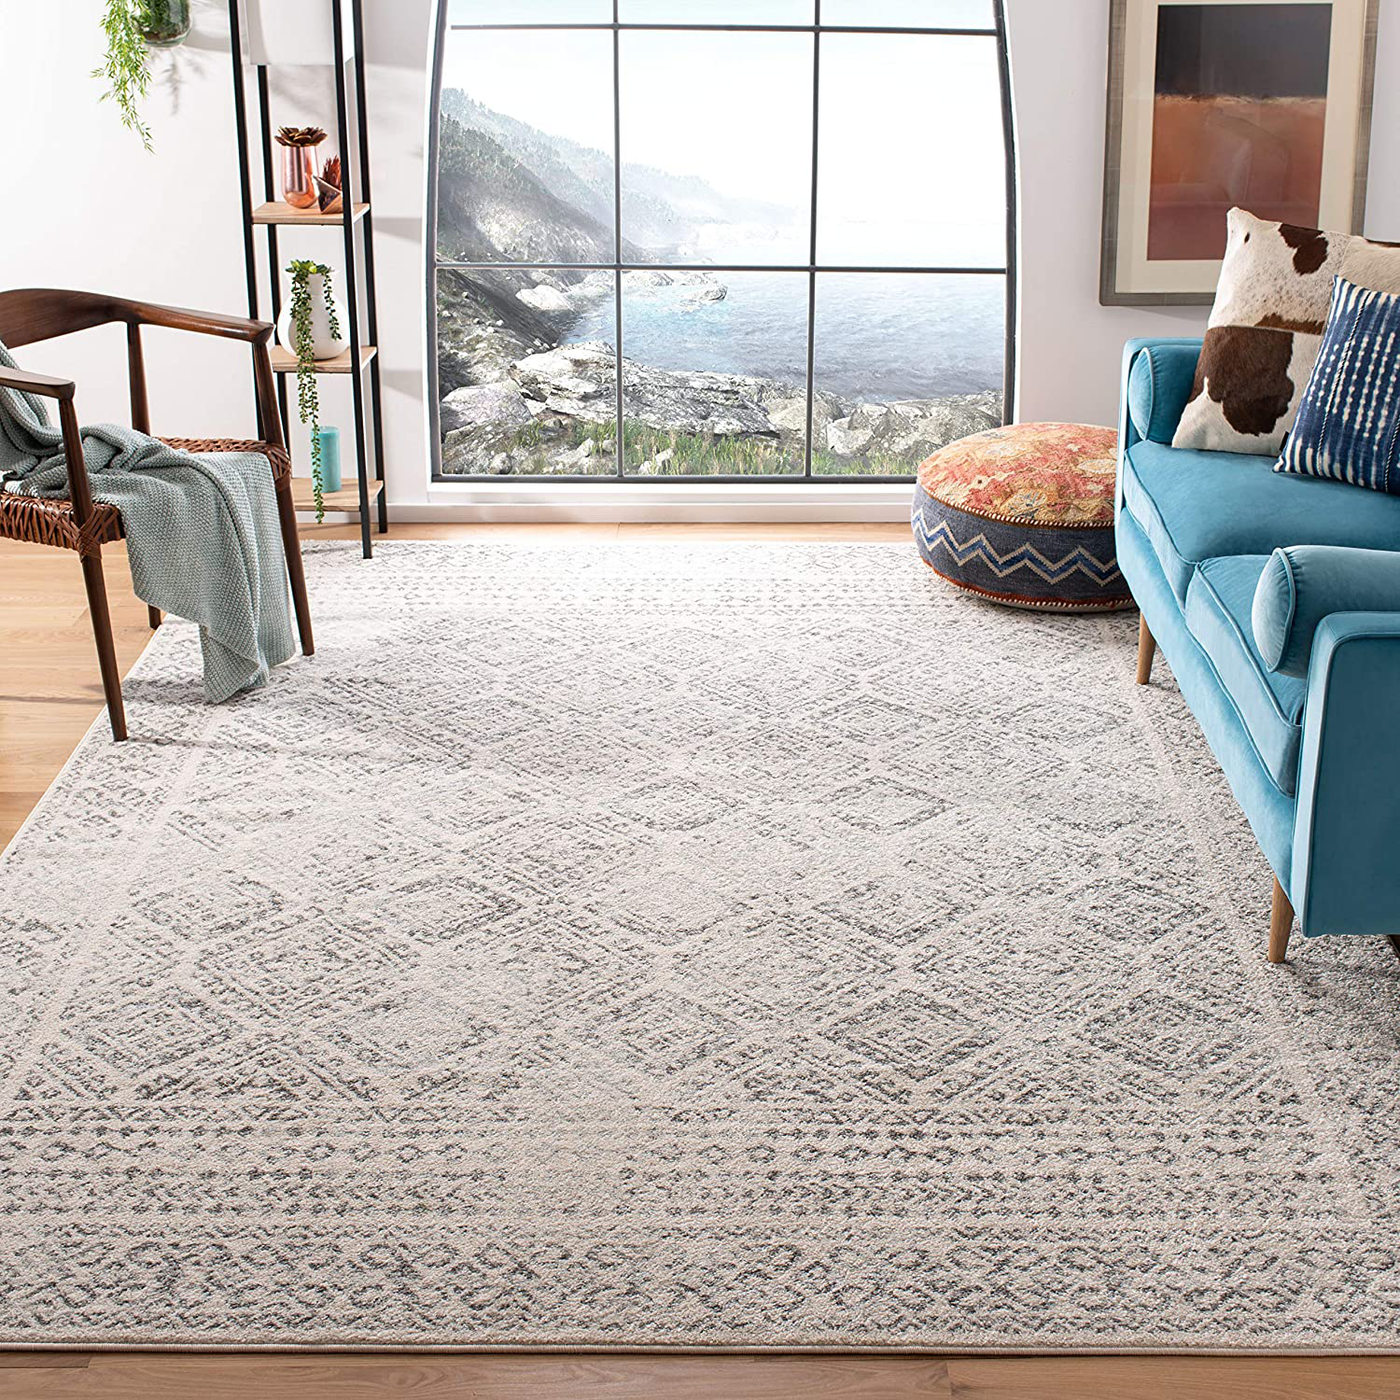 Safavieh Tulum Collection TUL264D Moroccan Boho Distressed Non-Shedding Stain Resistant Living Room Bedroom Area Rug, 3' x 5', Ivory / Dark Blue